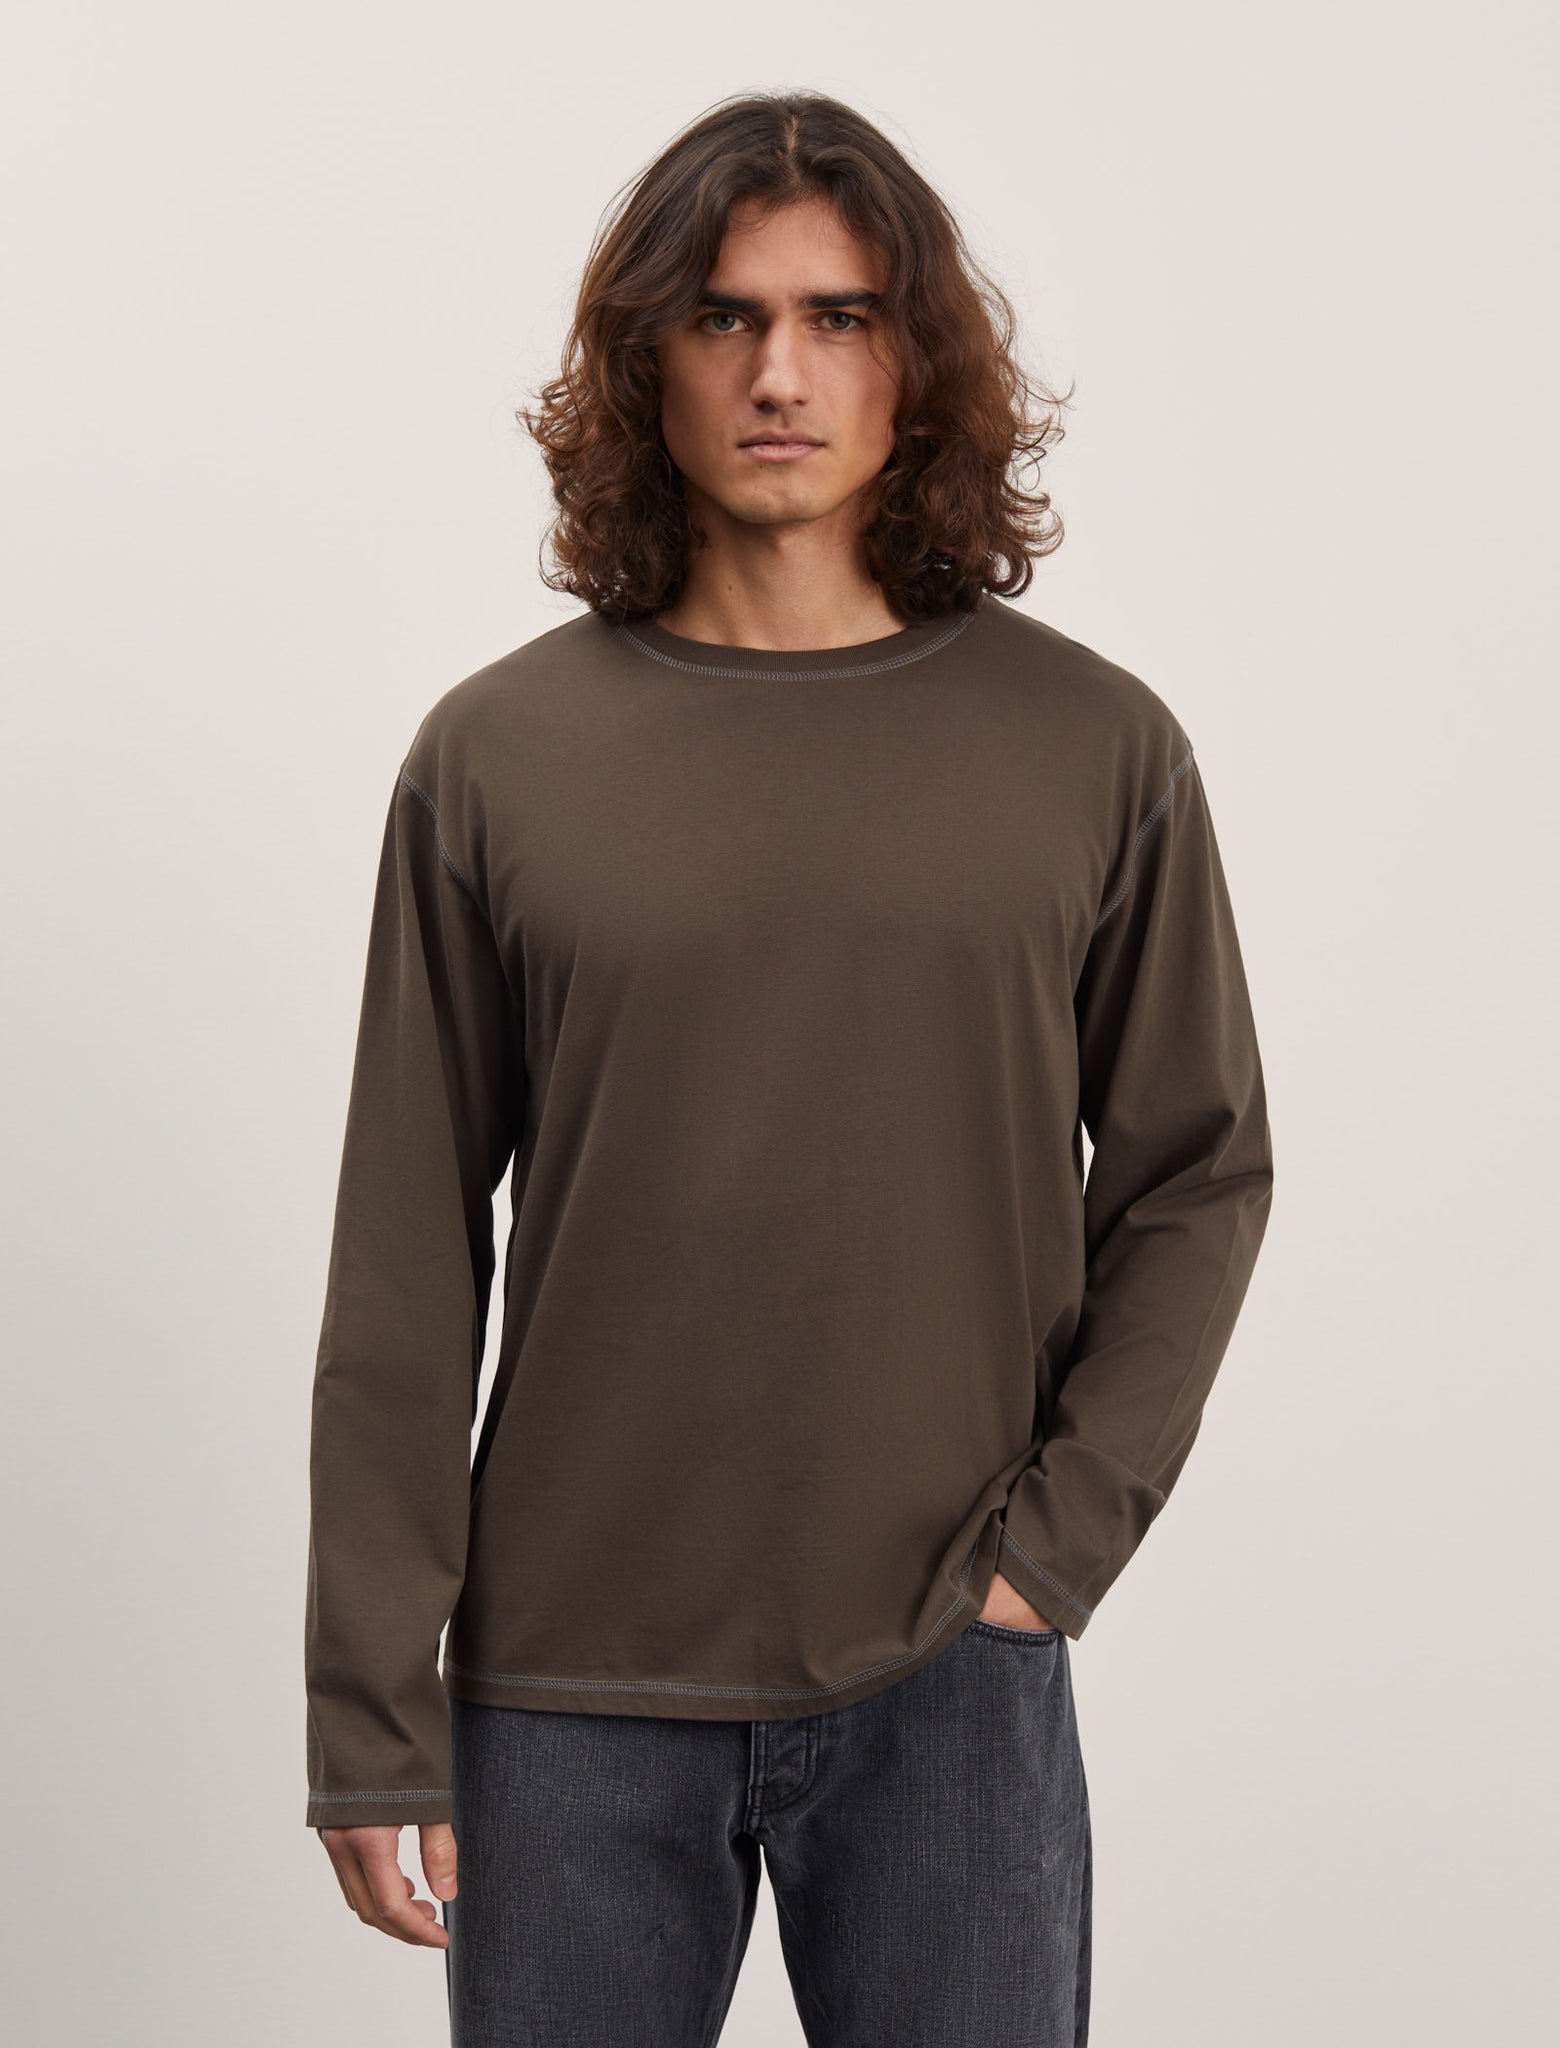 ANOTHER T-Shirt 3.0, Brown/Navy